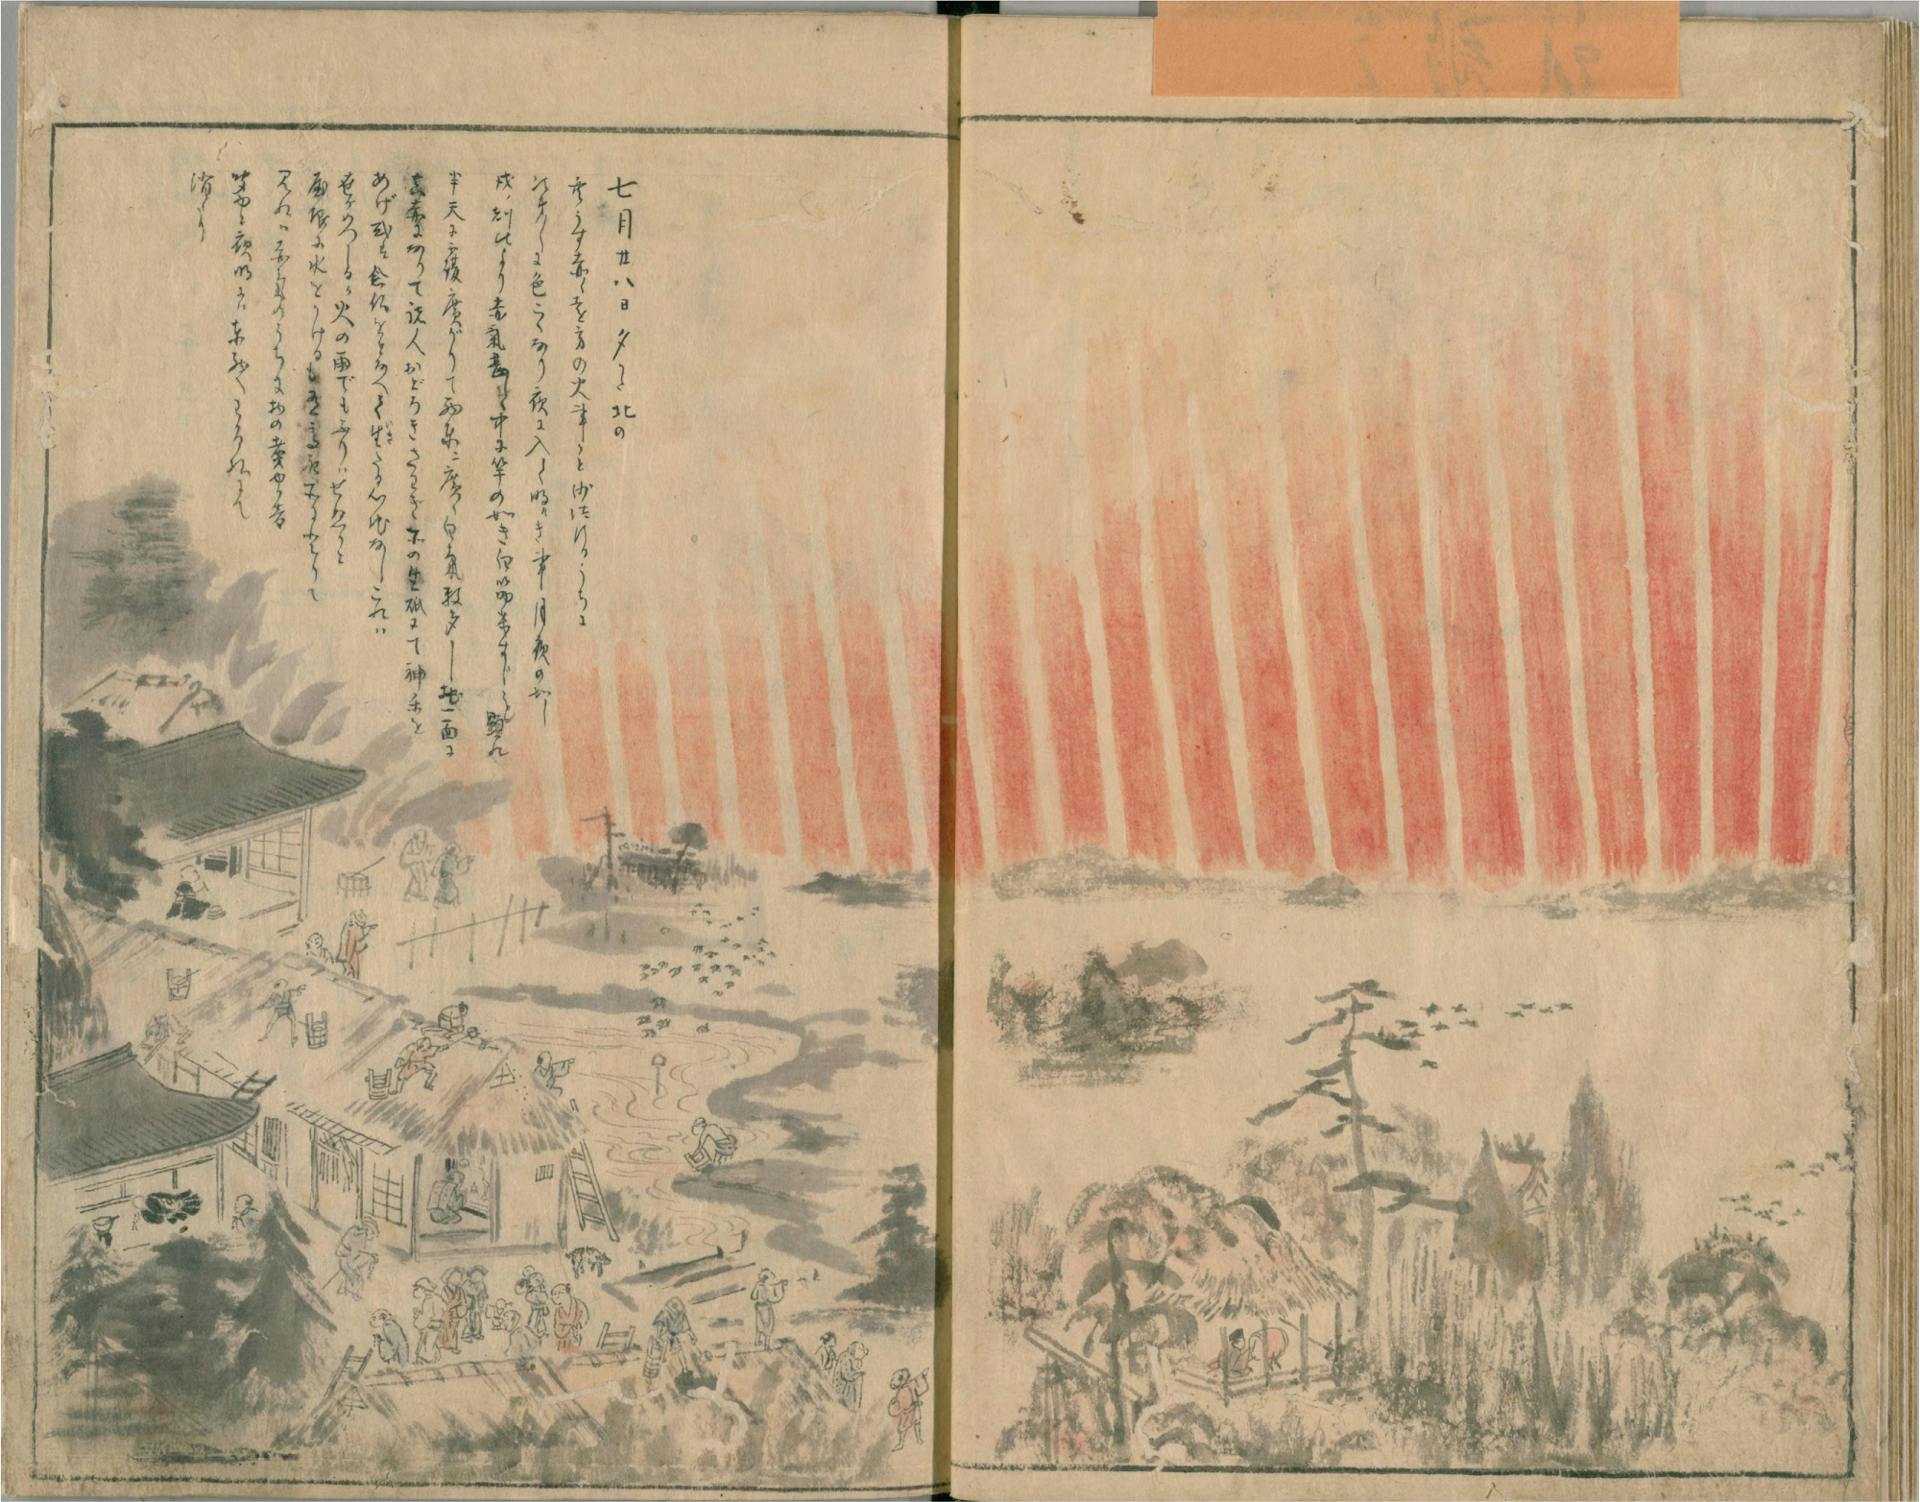 A drawing of the aurora observed from Nagoya, Japan, on September 17, 1770